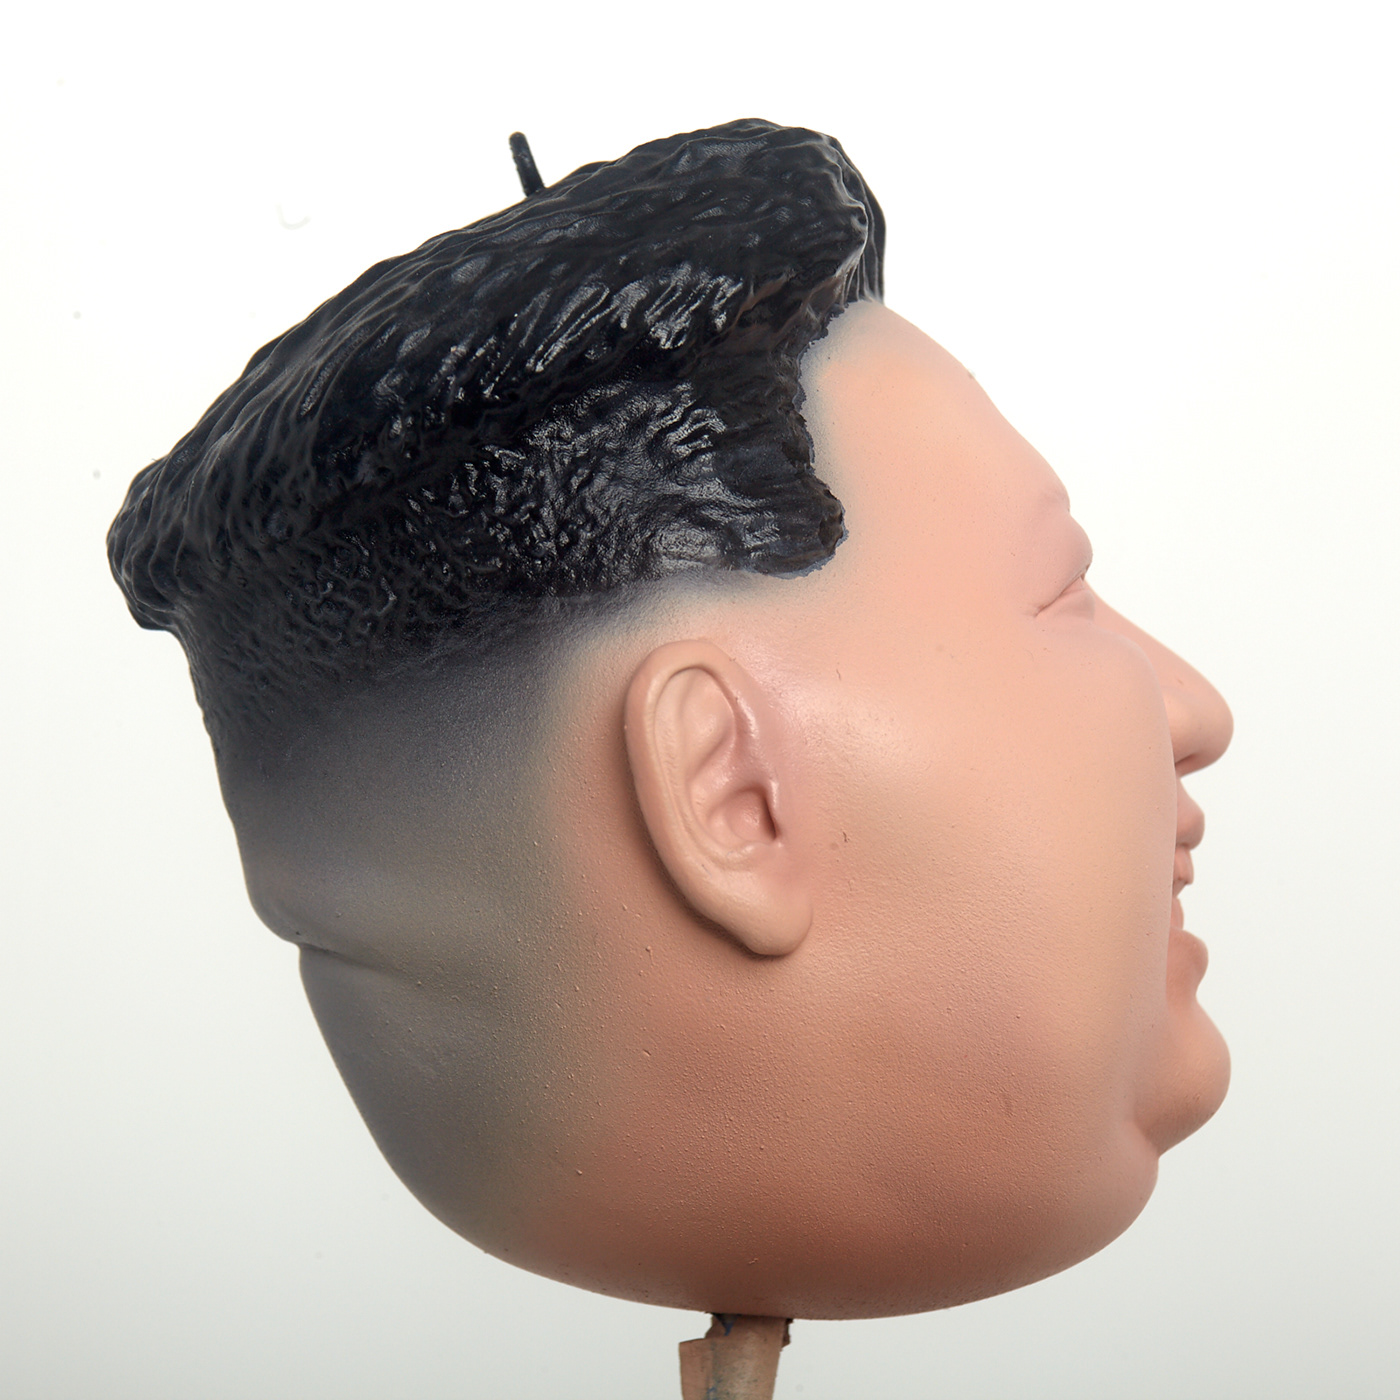 Kim Hair v2 01 (add stubble growth and harder edge to hairline) 